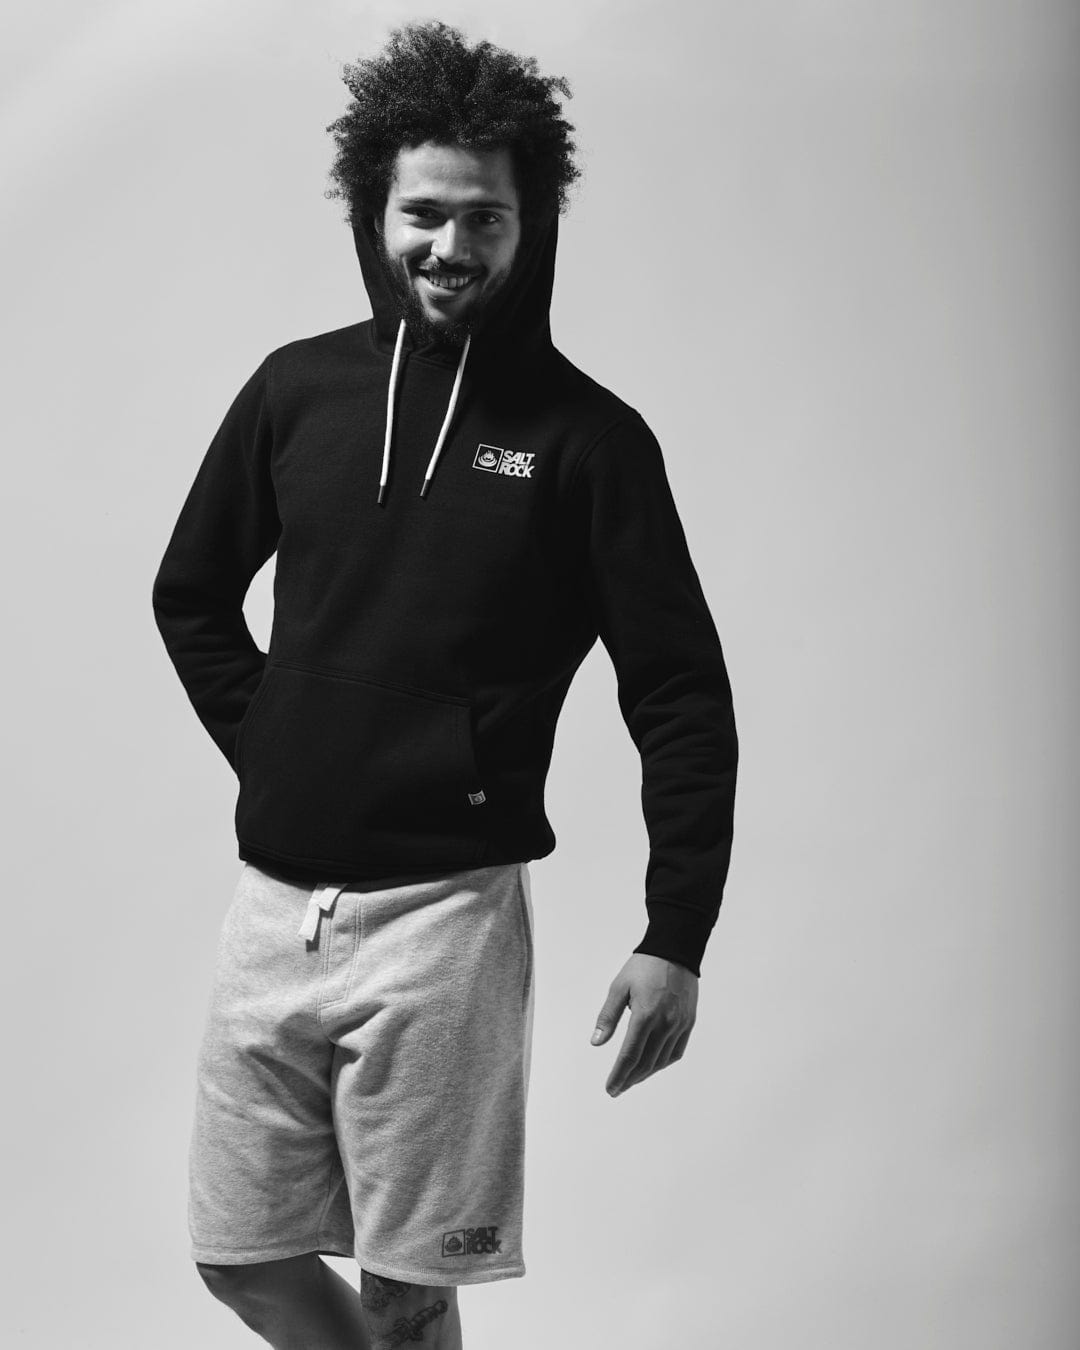 A person with curly hair wearing a Saltrock Original - Mens Pop Hoodie in Black made from soft jersey material and gray shorts stands with one hand in a pocket, smiling slightly at the camera.